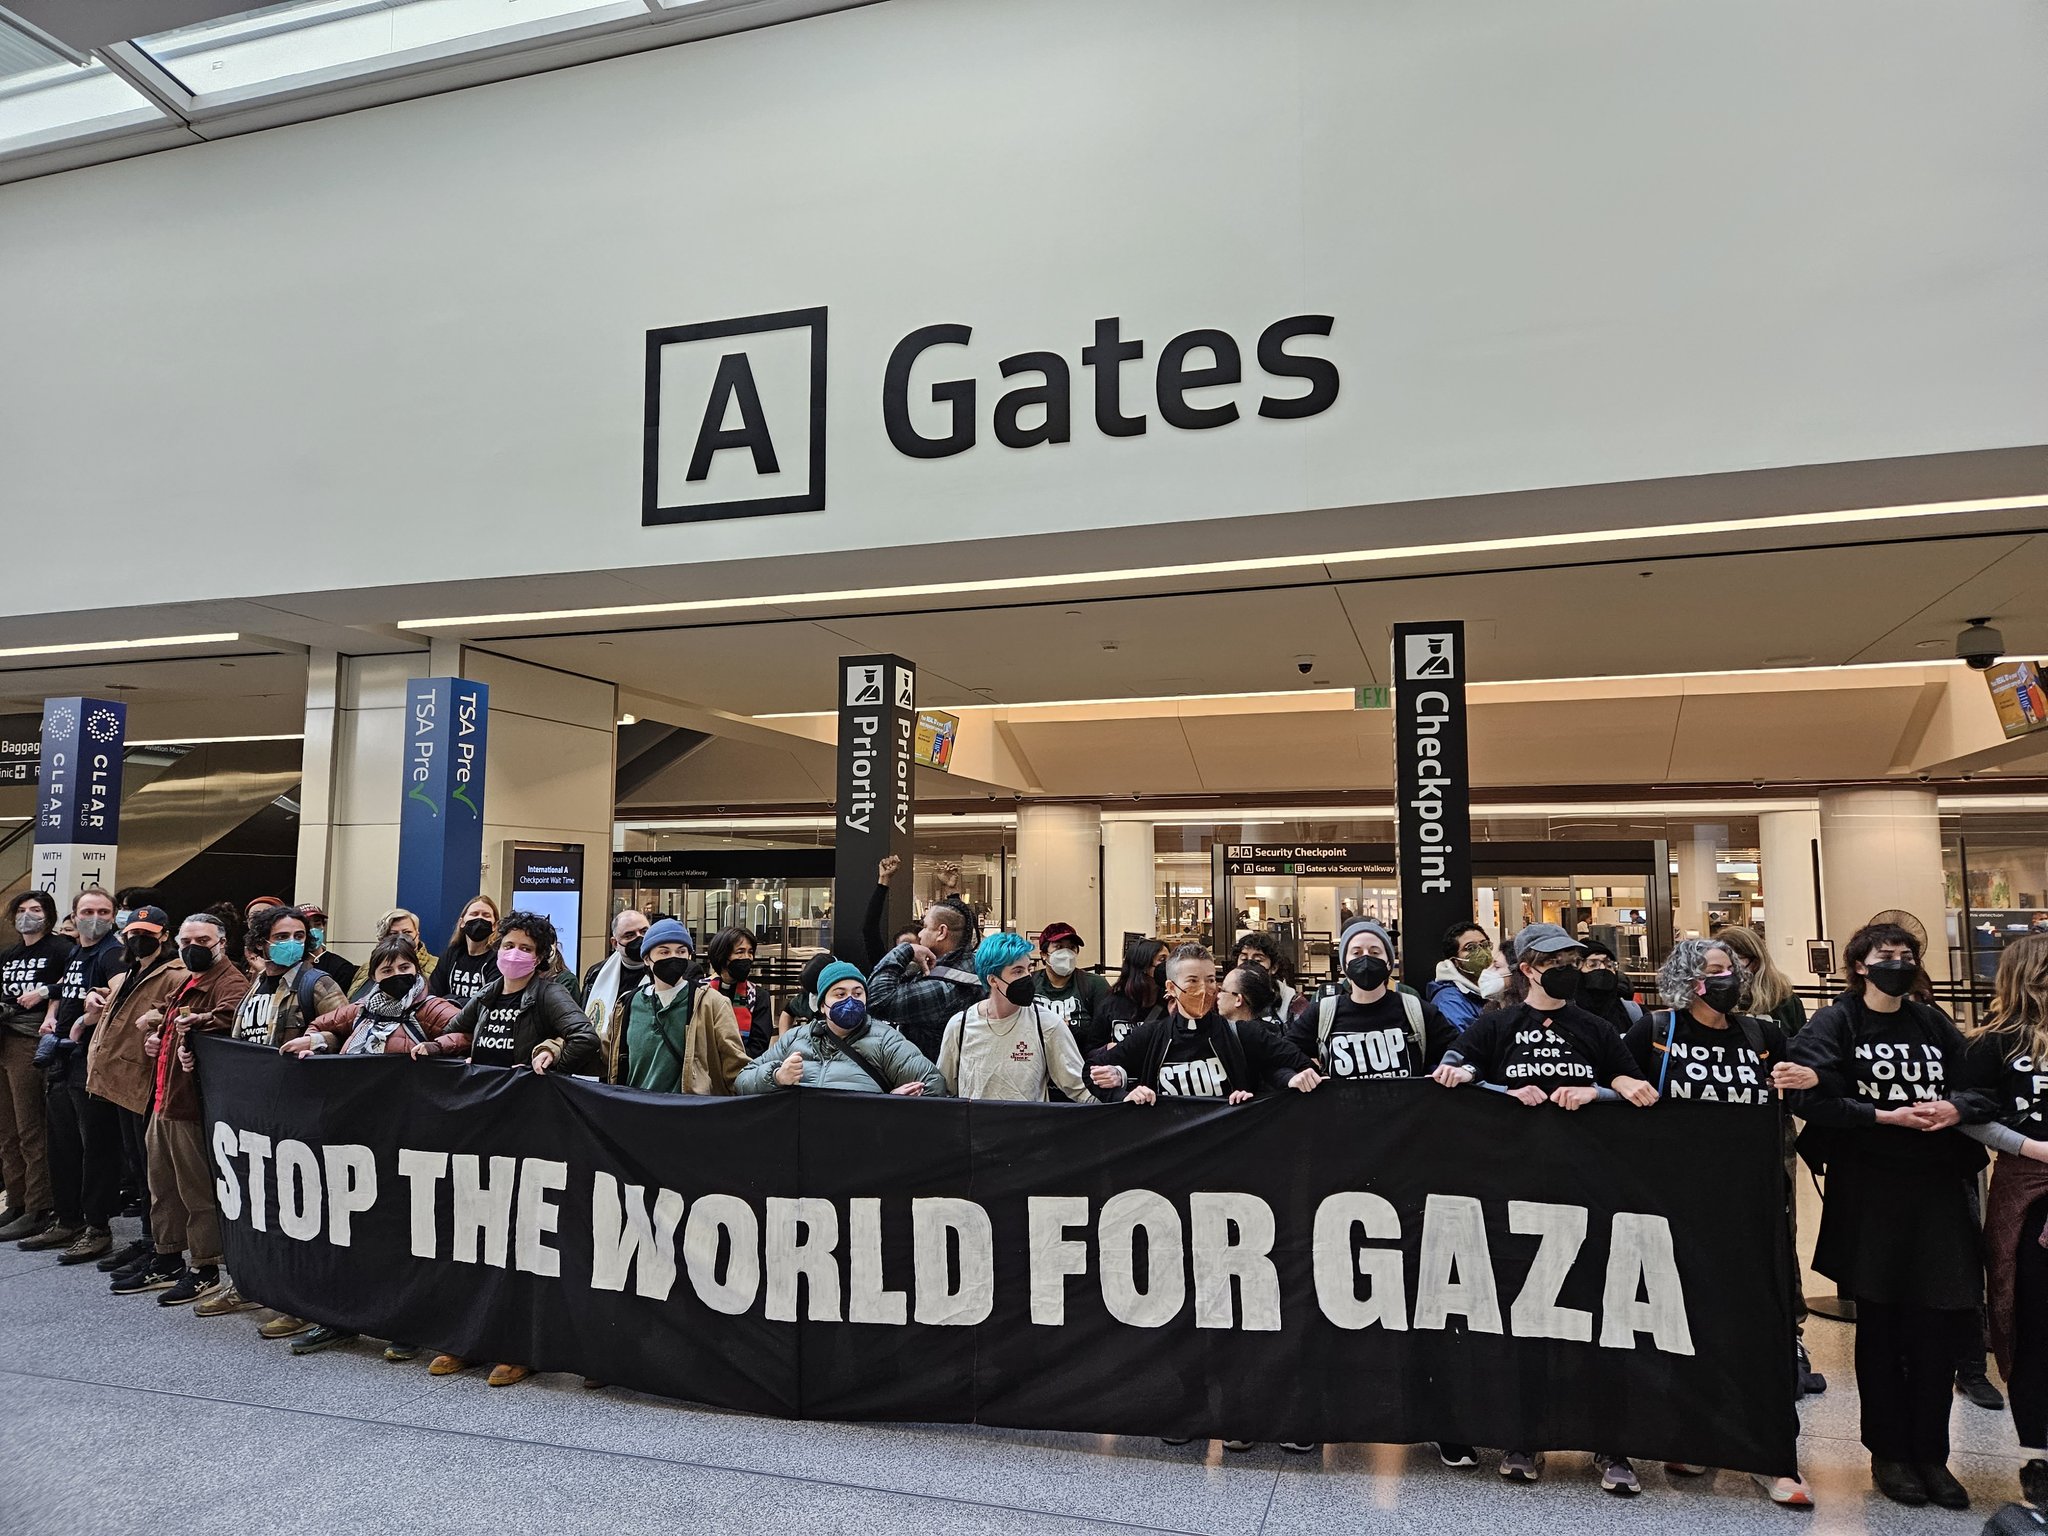 Group of masked people holding a banner reading "STOP THE WORLD FOR GAZA" at an airport gate area.